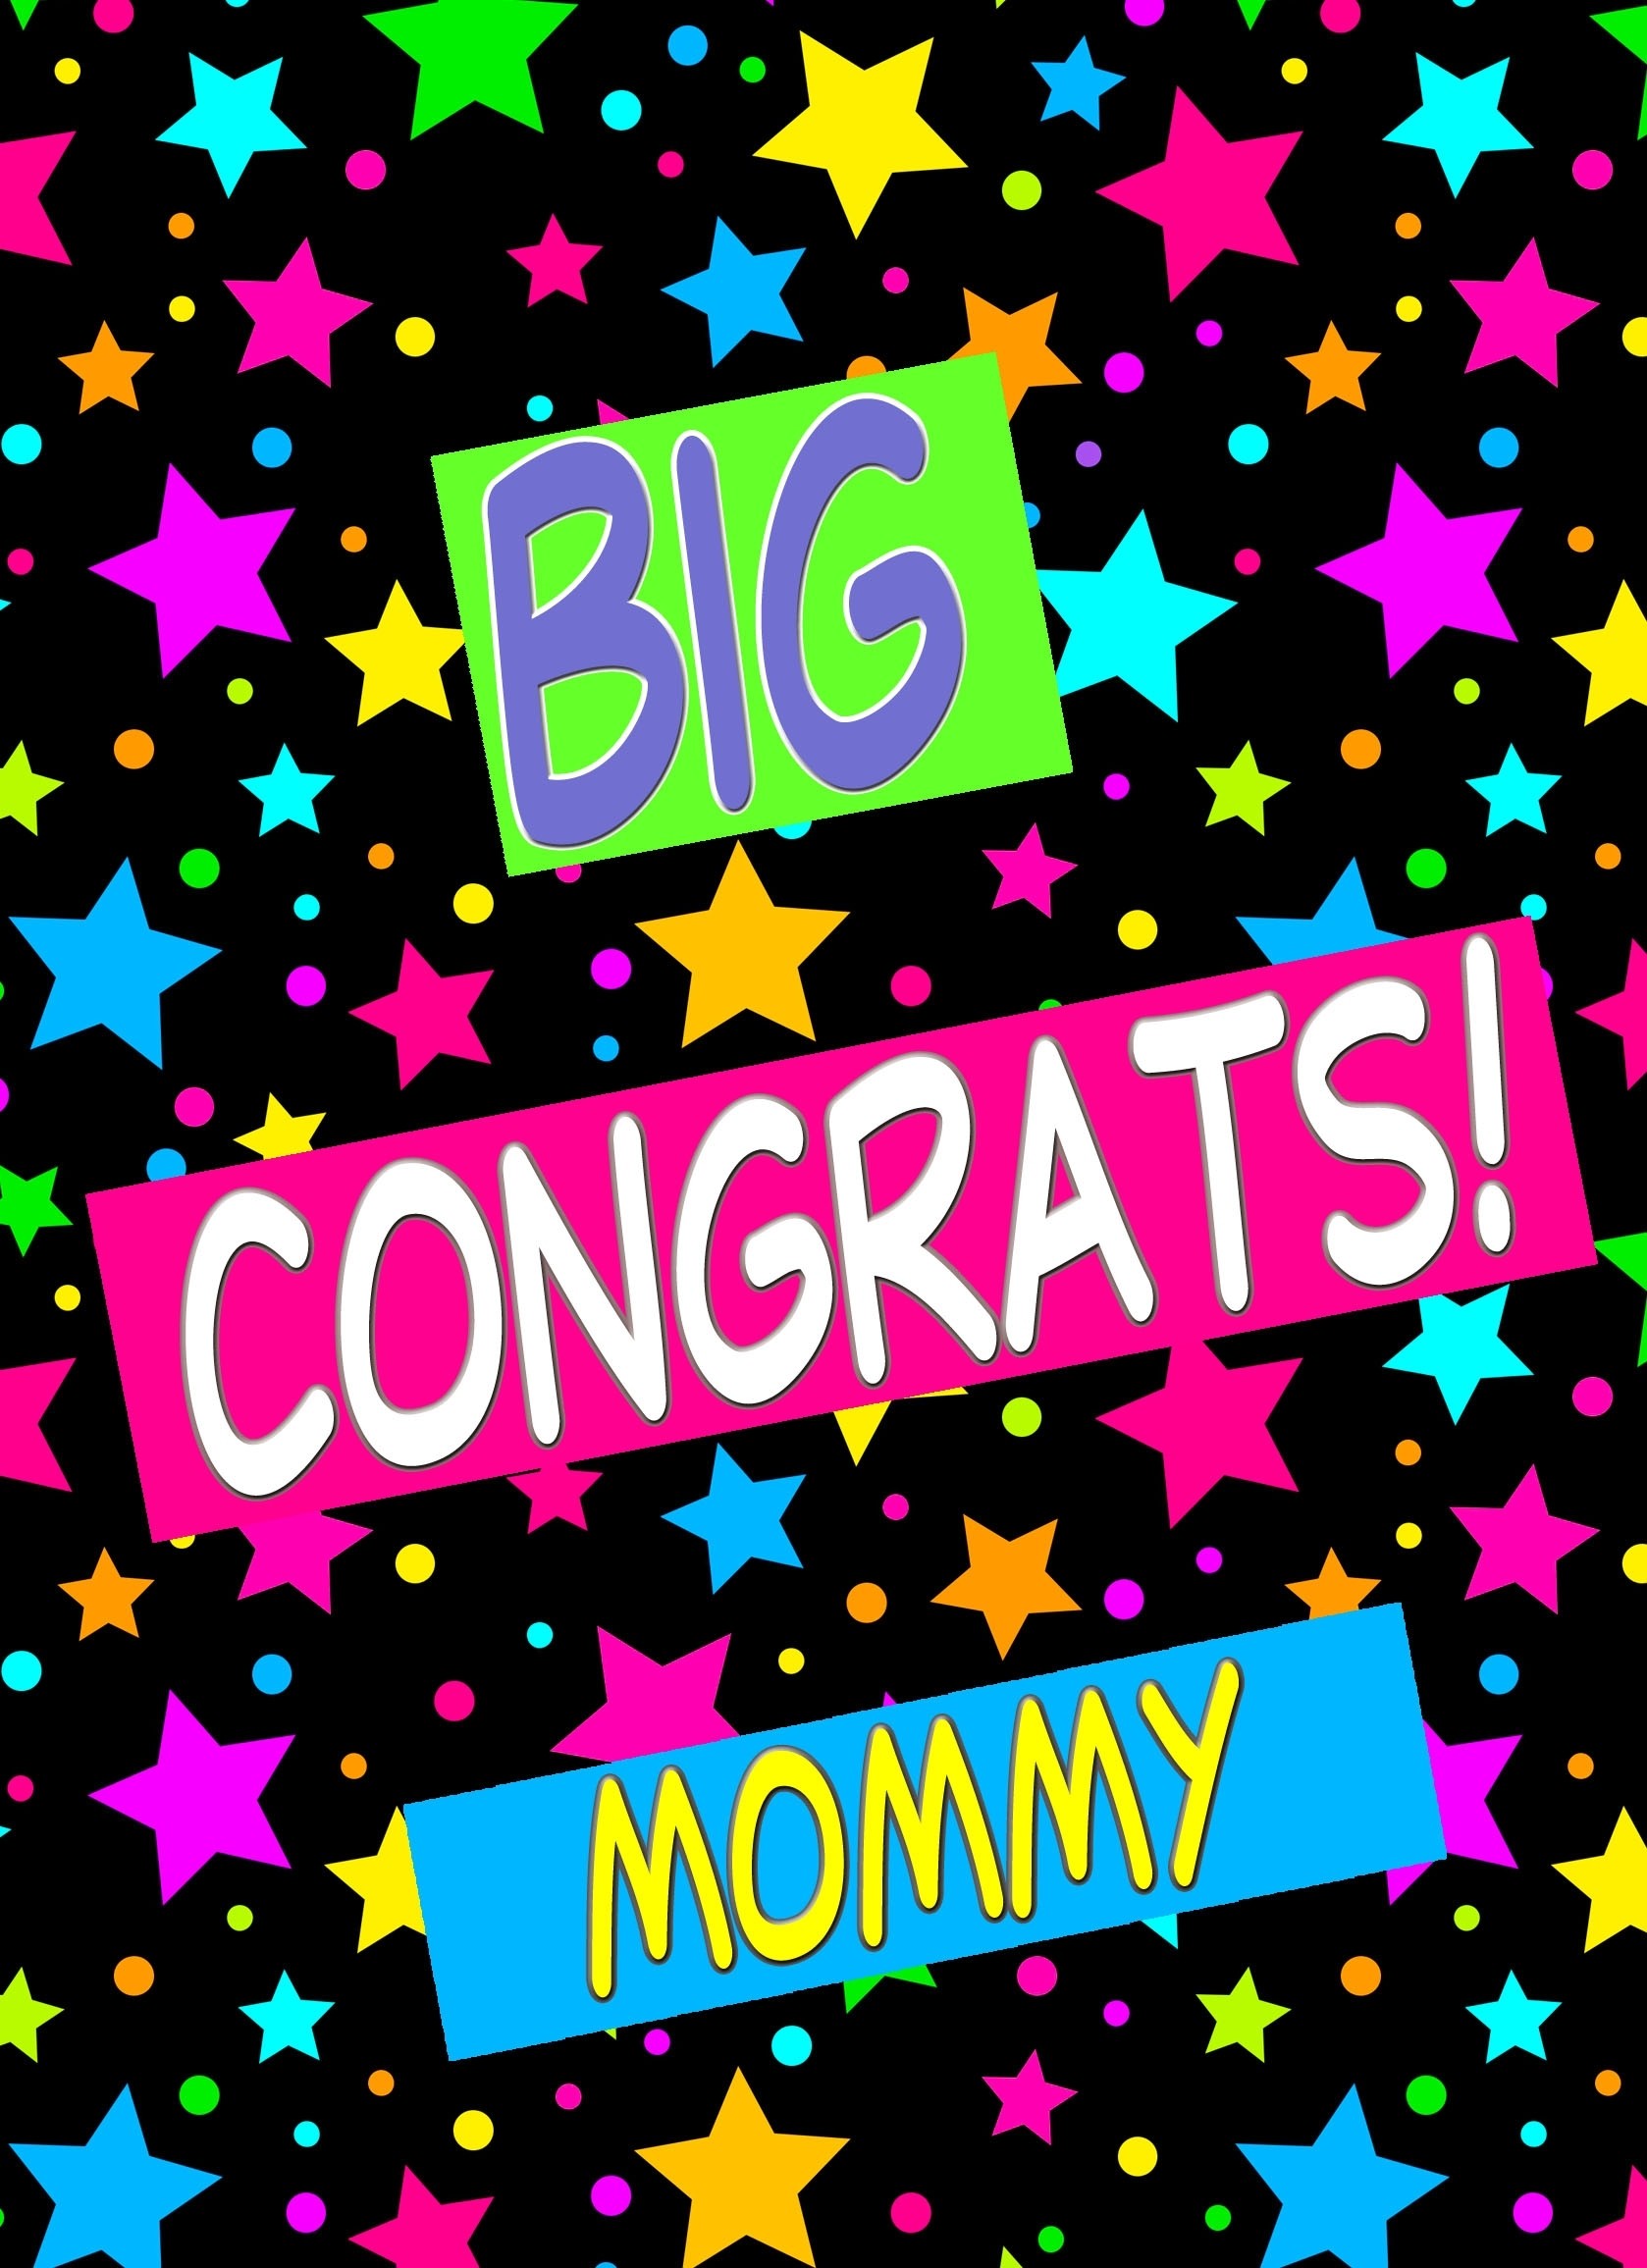 Congratulations Card For Mommy (Stars)